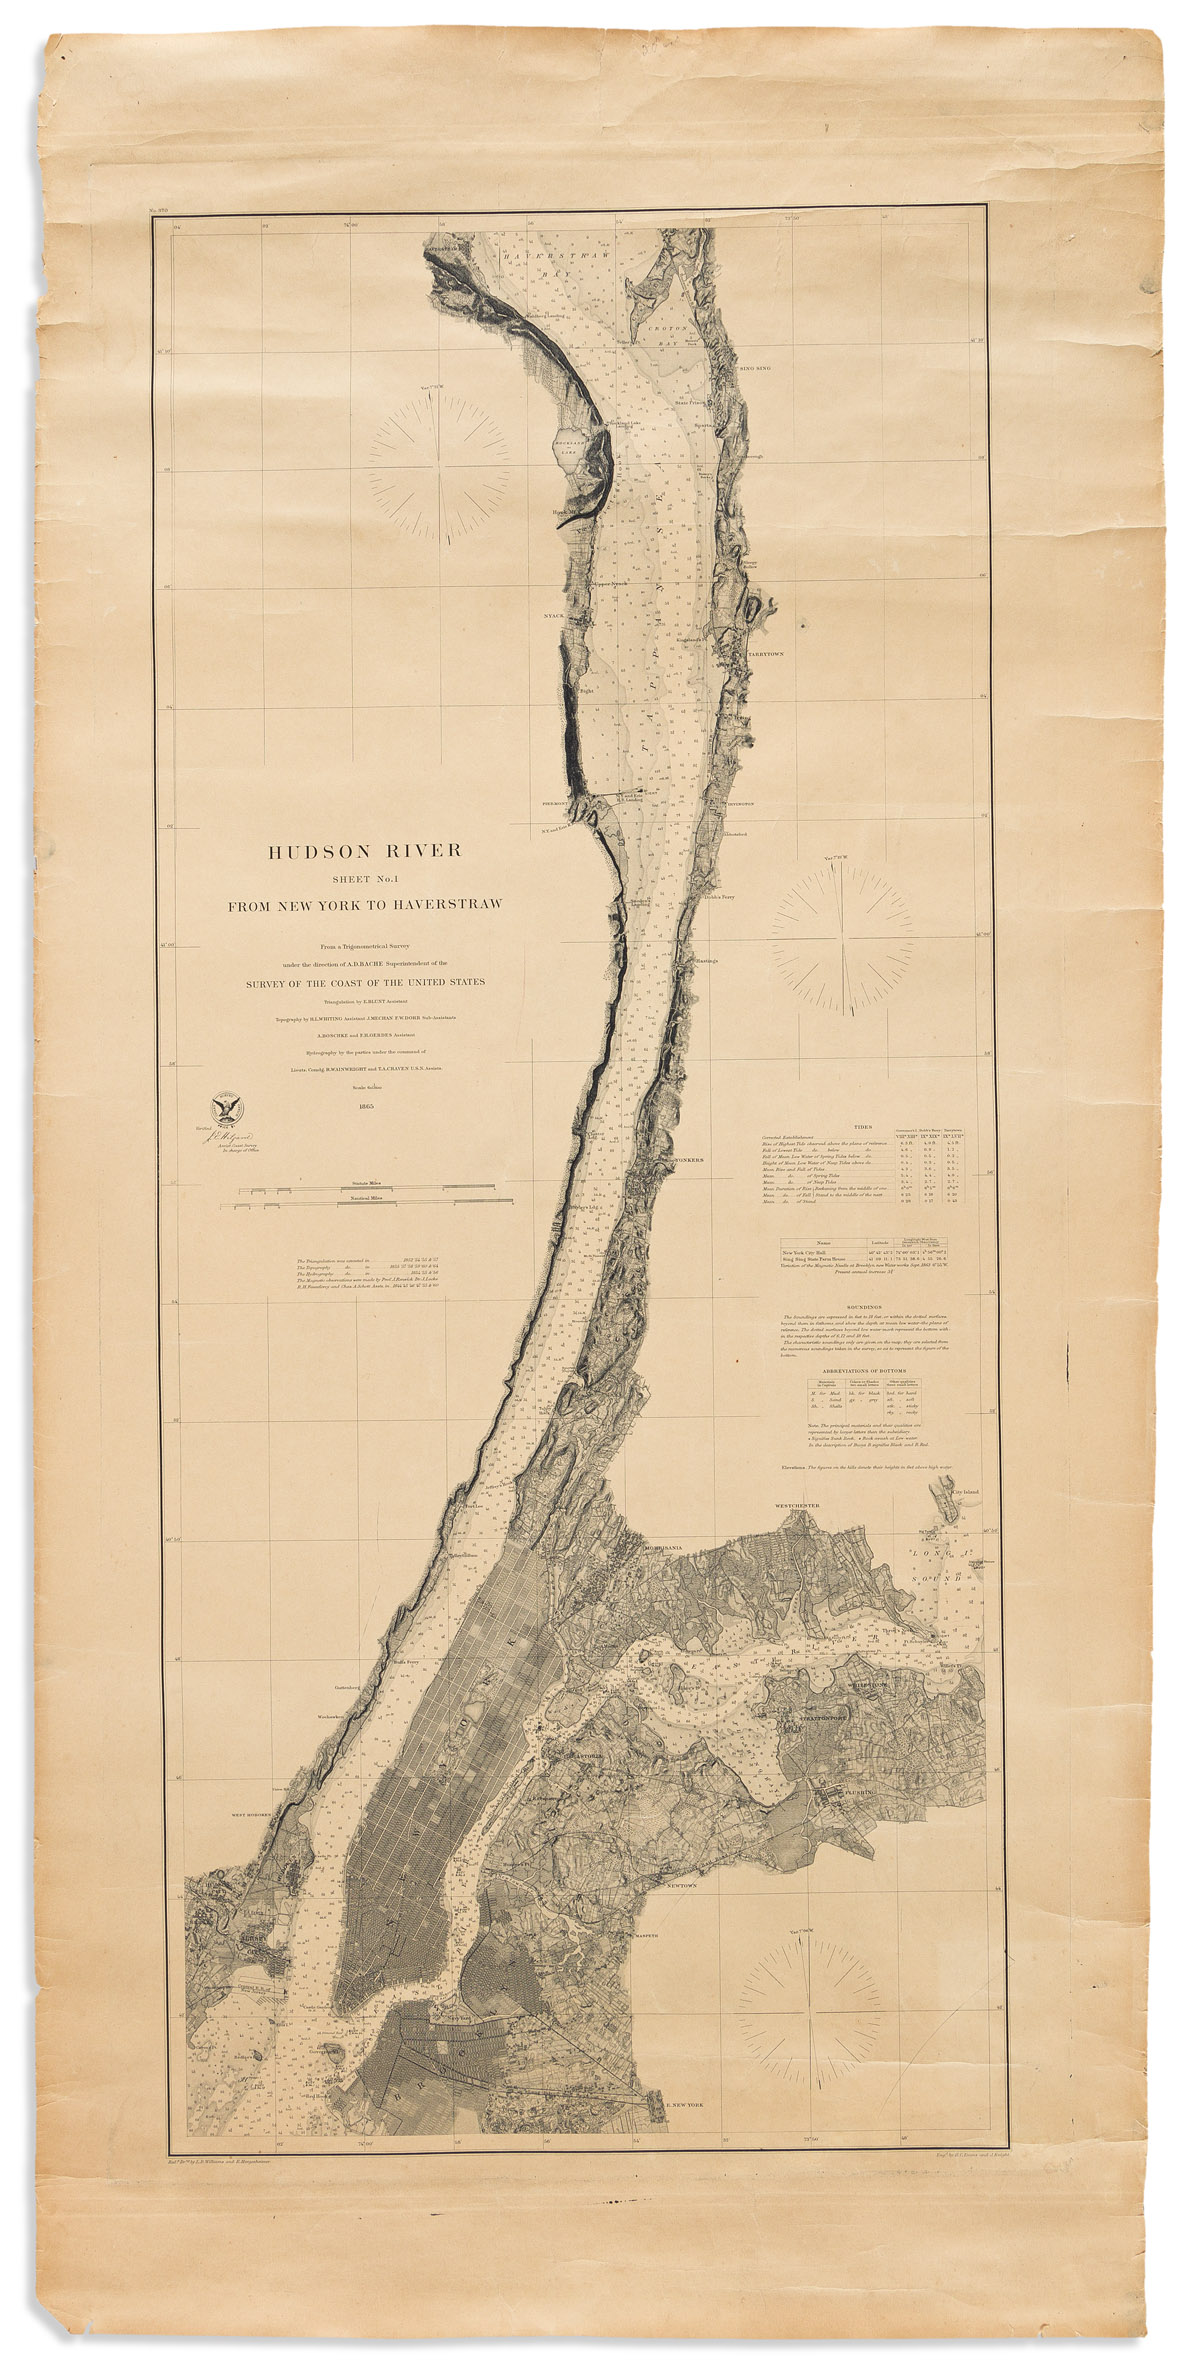 Hudson River Sheet No. 1 From New York to Haverstraw.